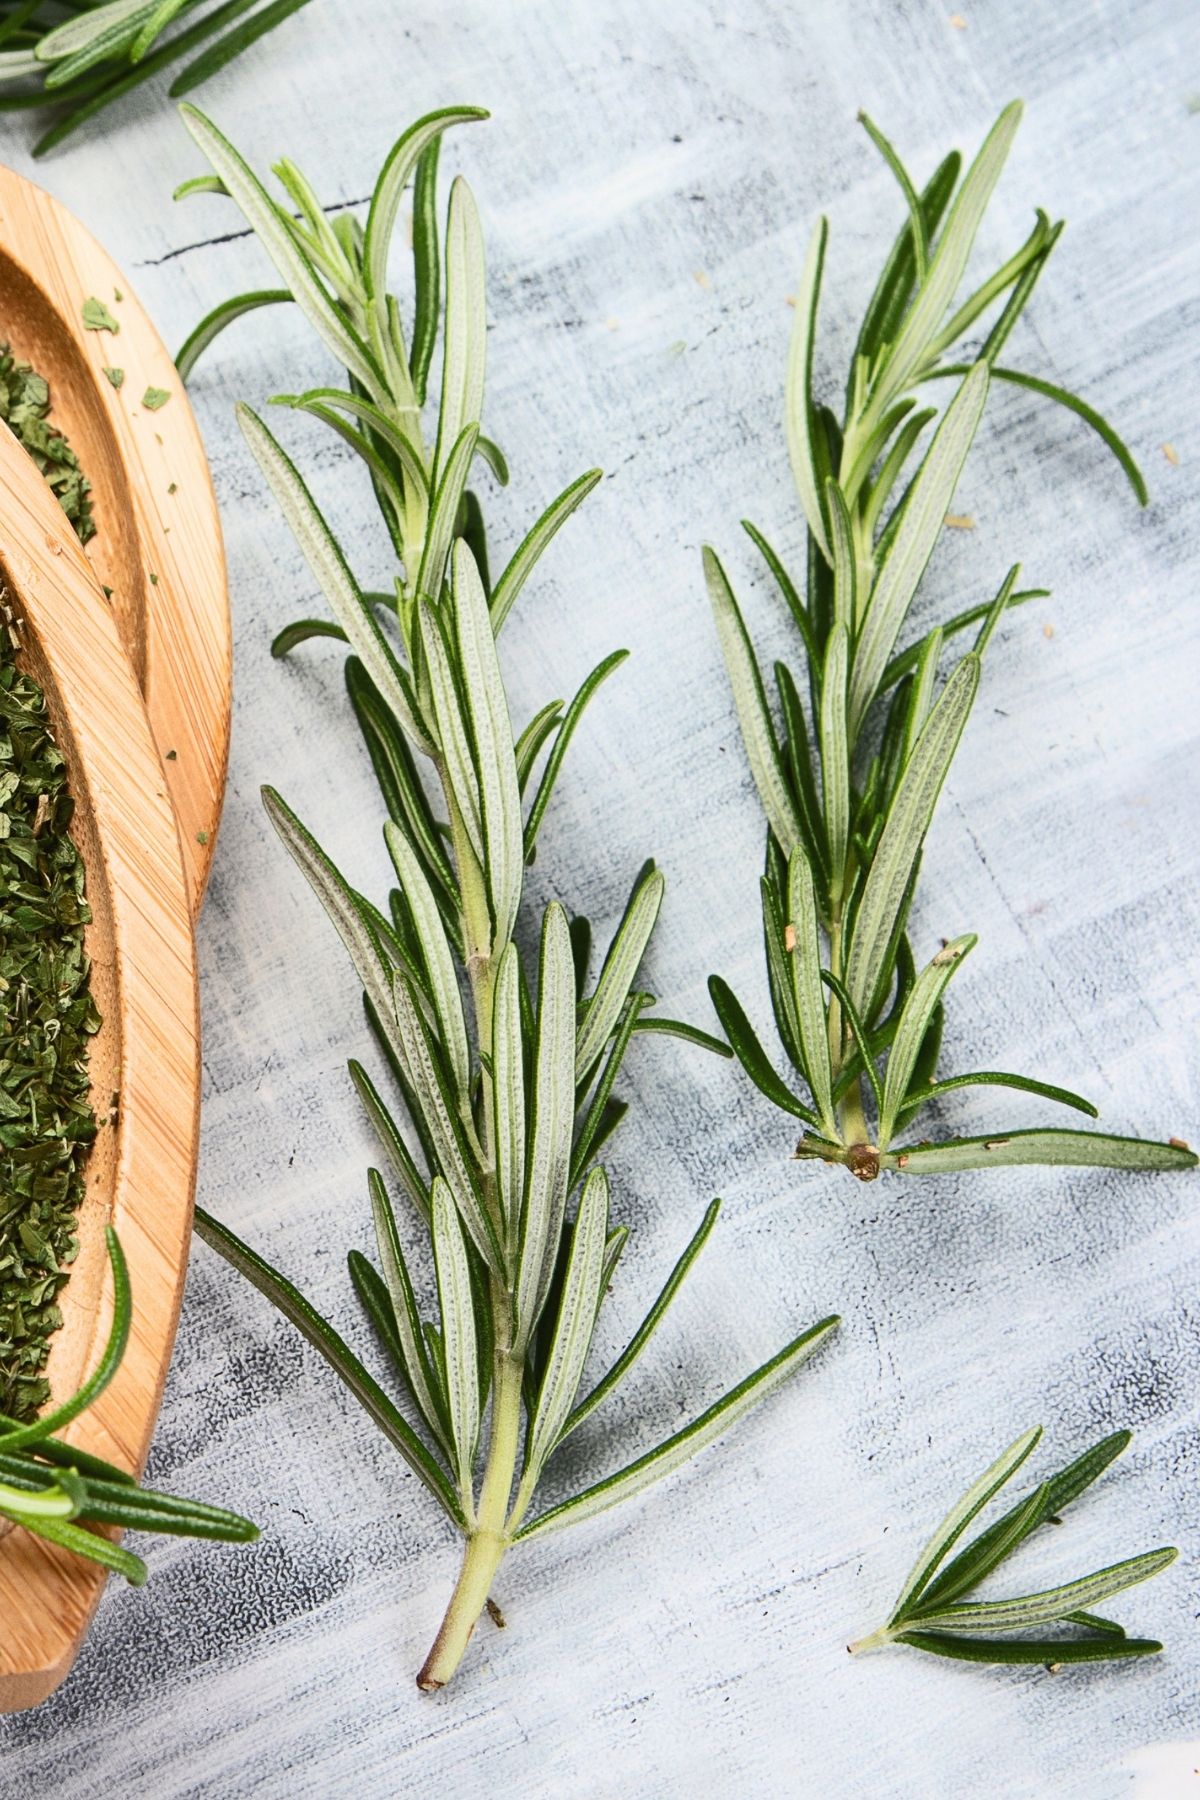 Fresh rosemary sprigs on a white surface.